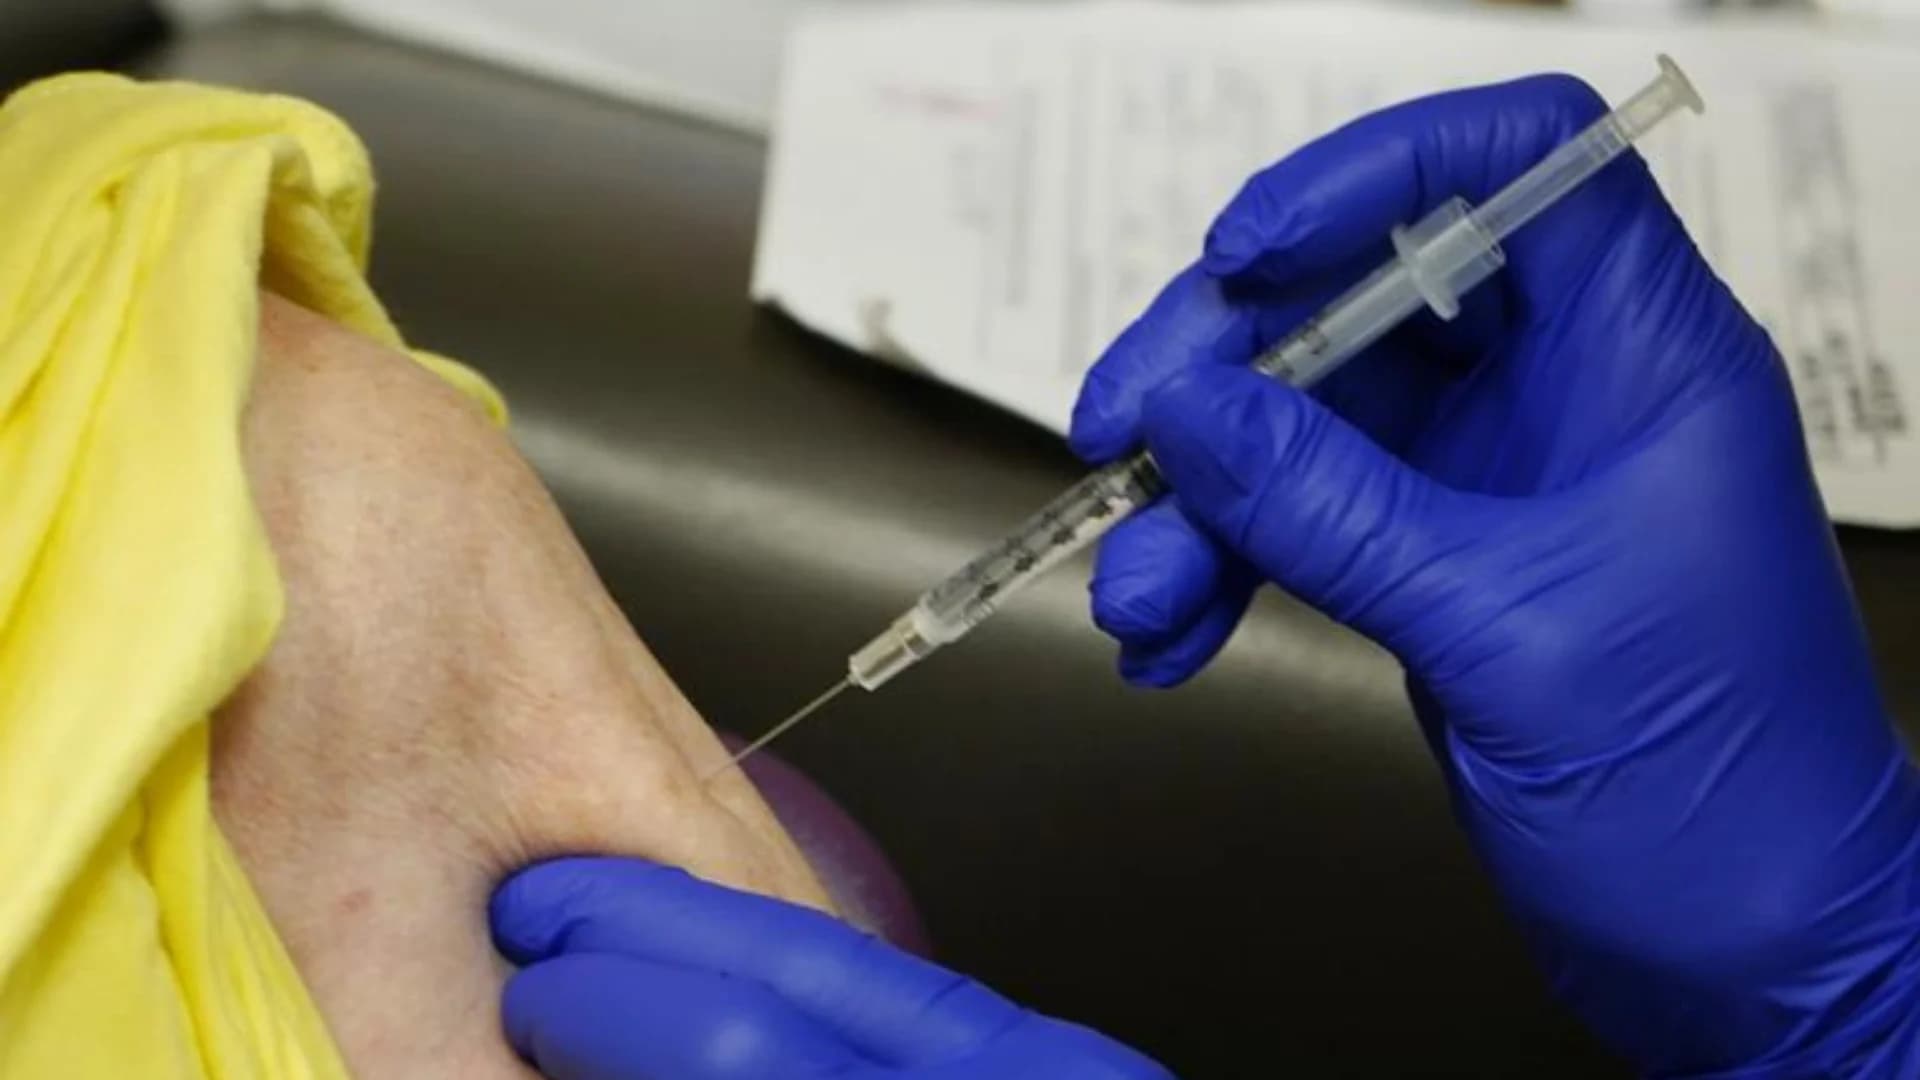 Infections persist as vaccinations lag at some nursing homes